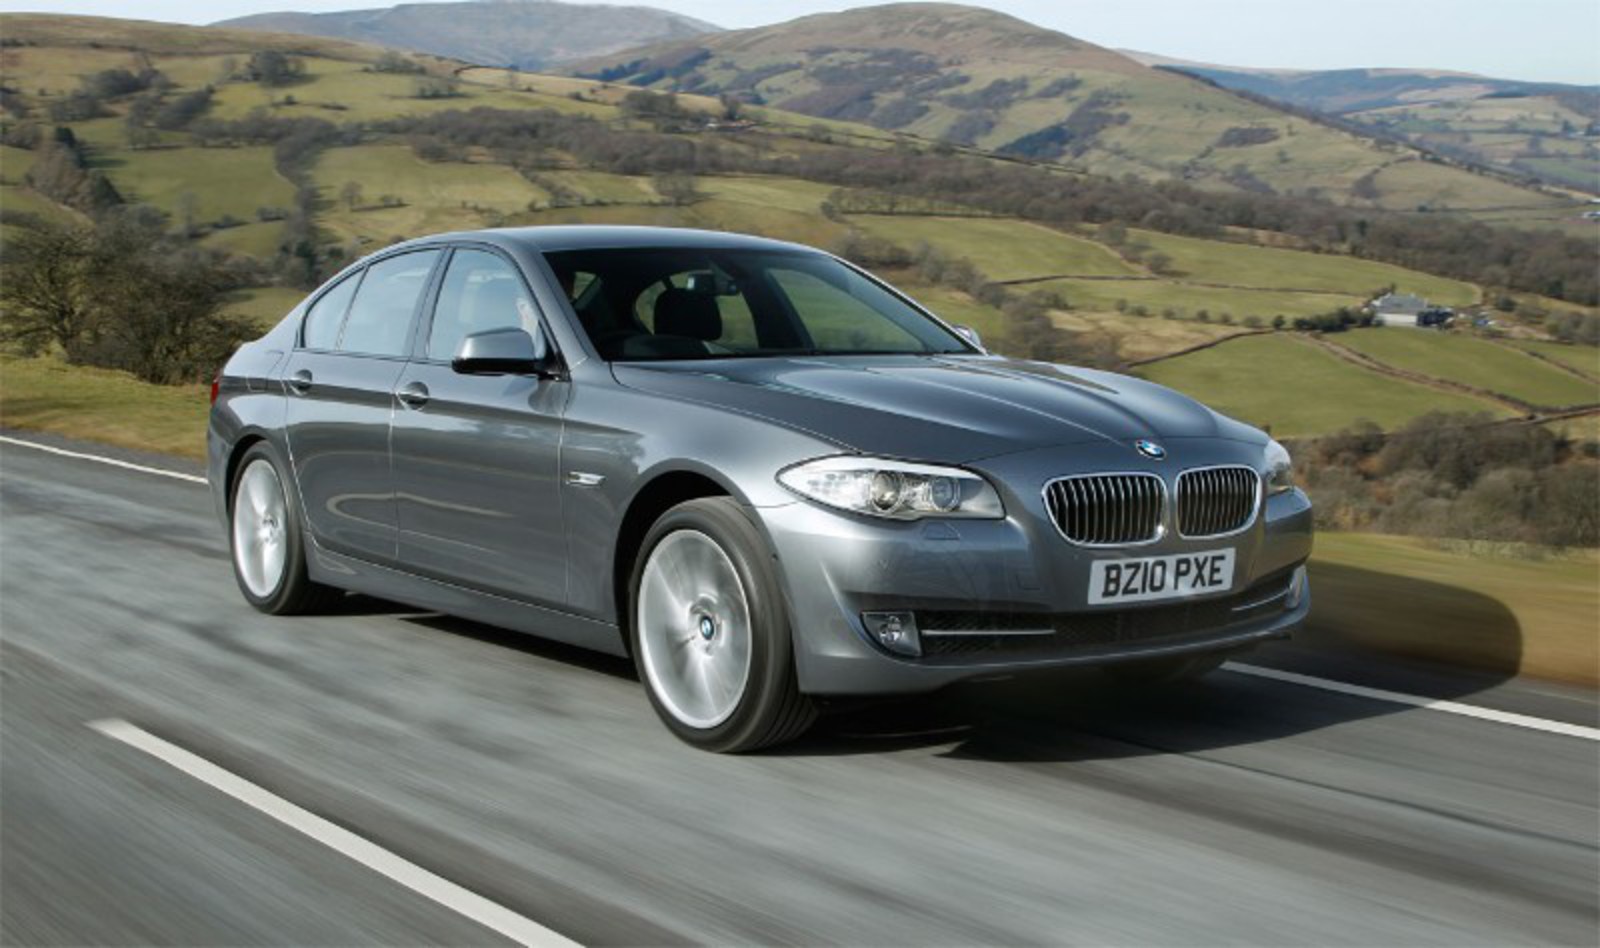 2011 Bmw 520d shows better fuel economy than a Toyota Prius